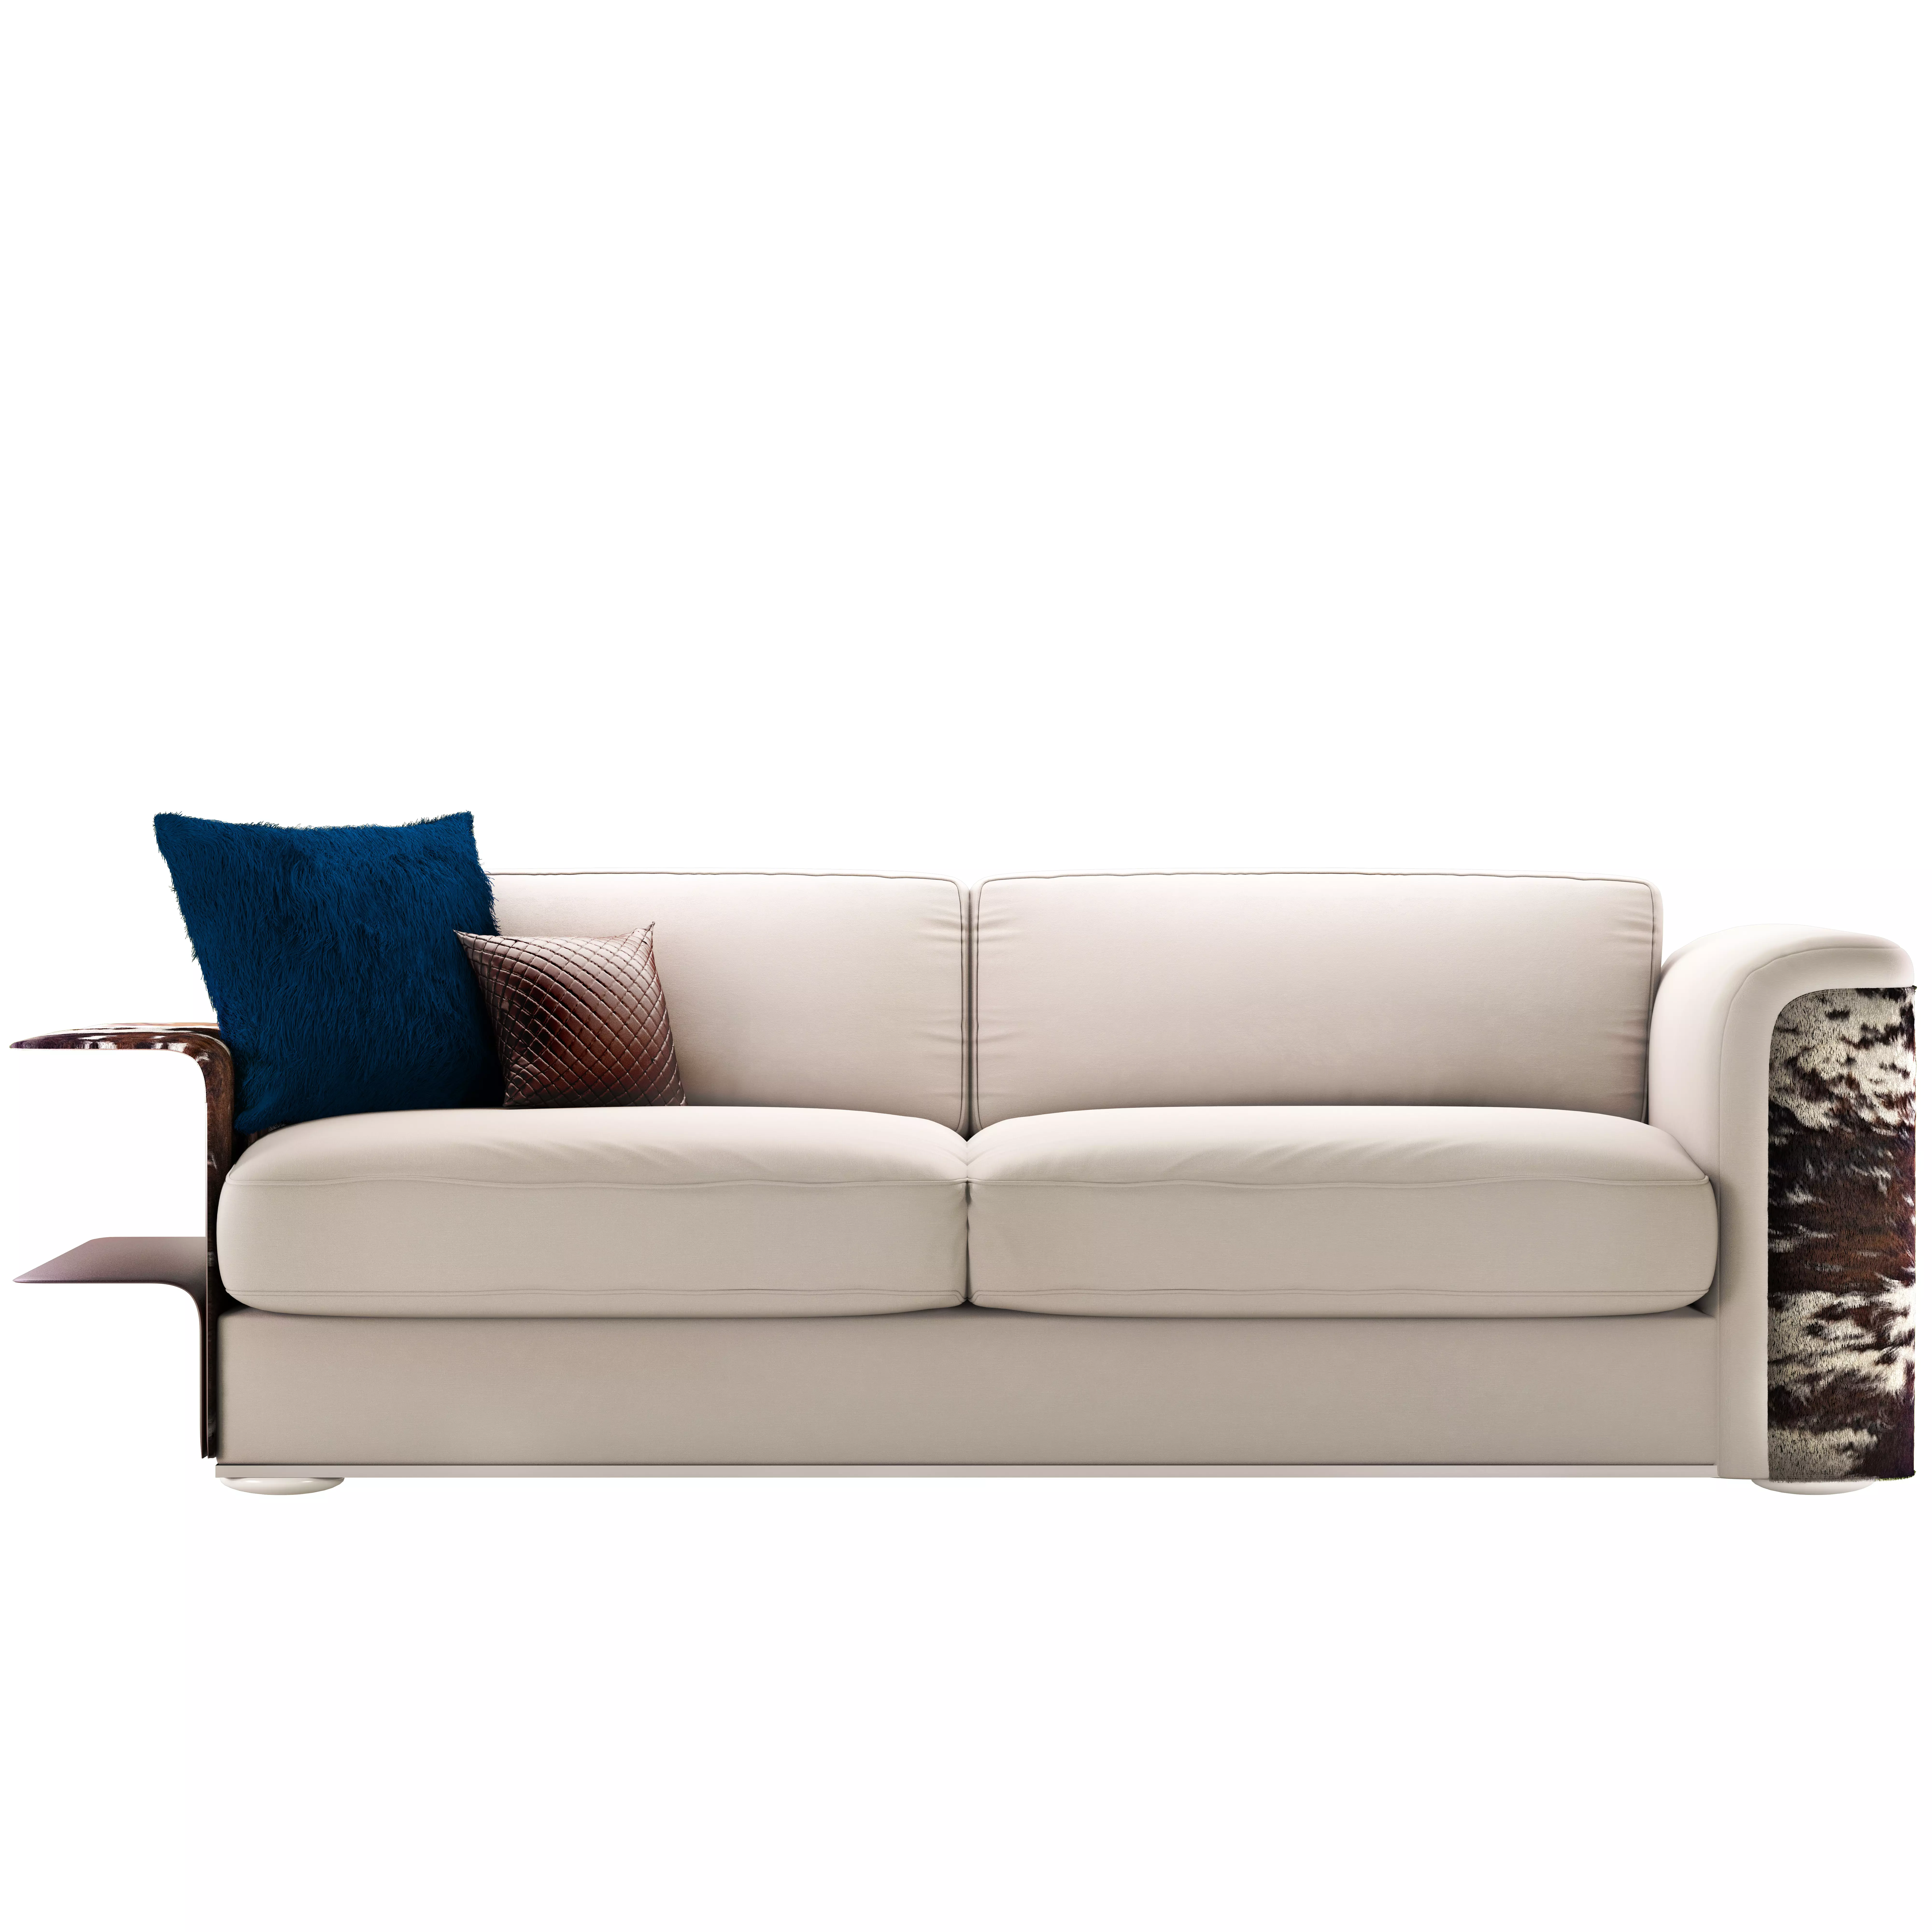 BUFFALO Seating Group will ventilate your home with its aesthetic design and details